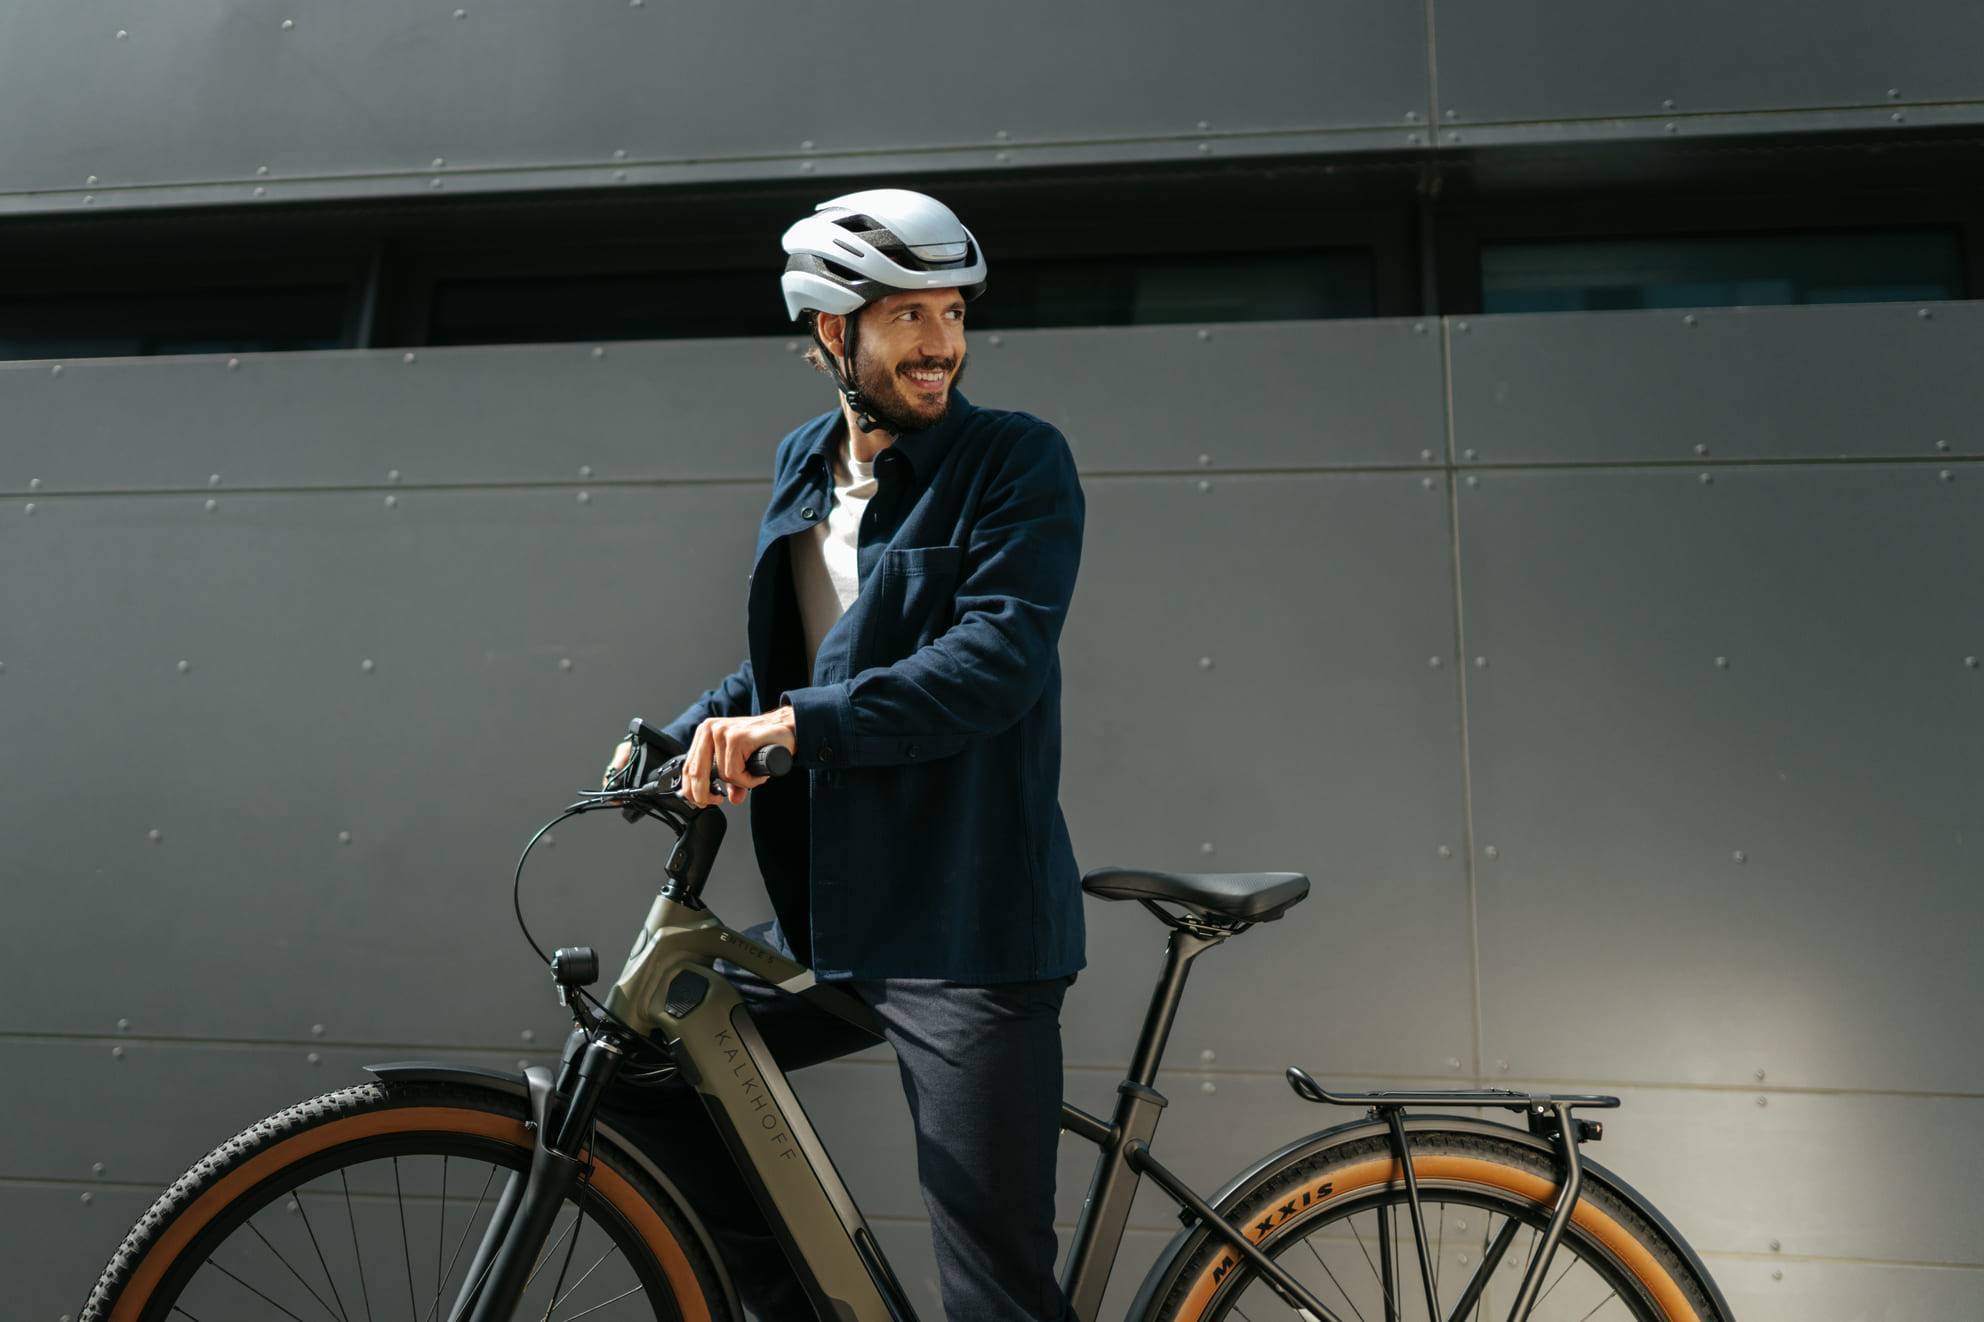 man on bike standing next to wall looking back and smiling